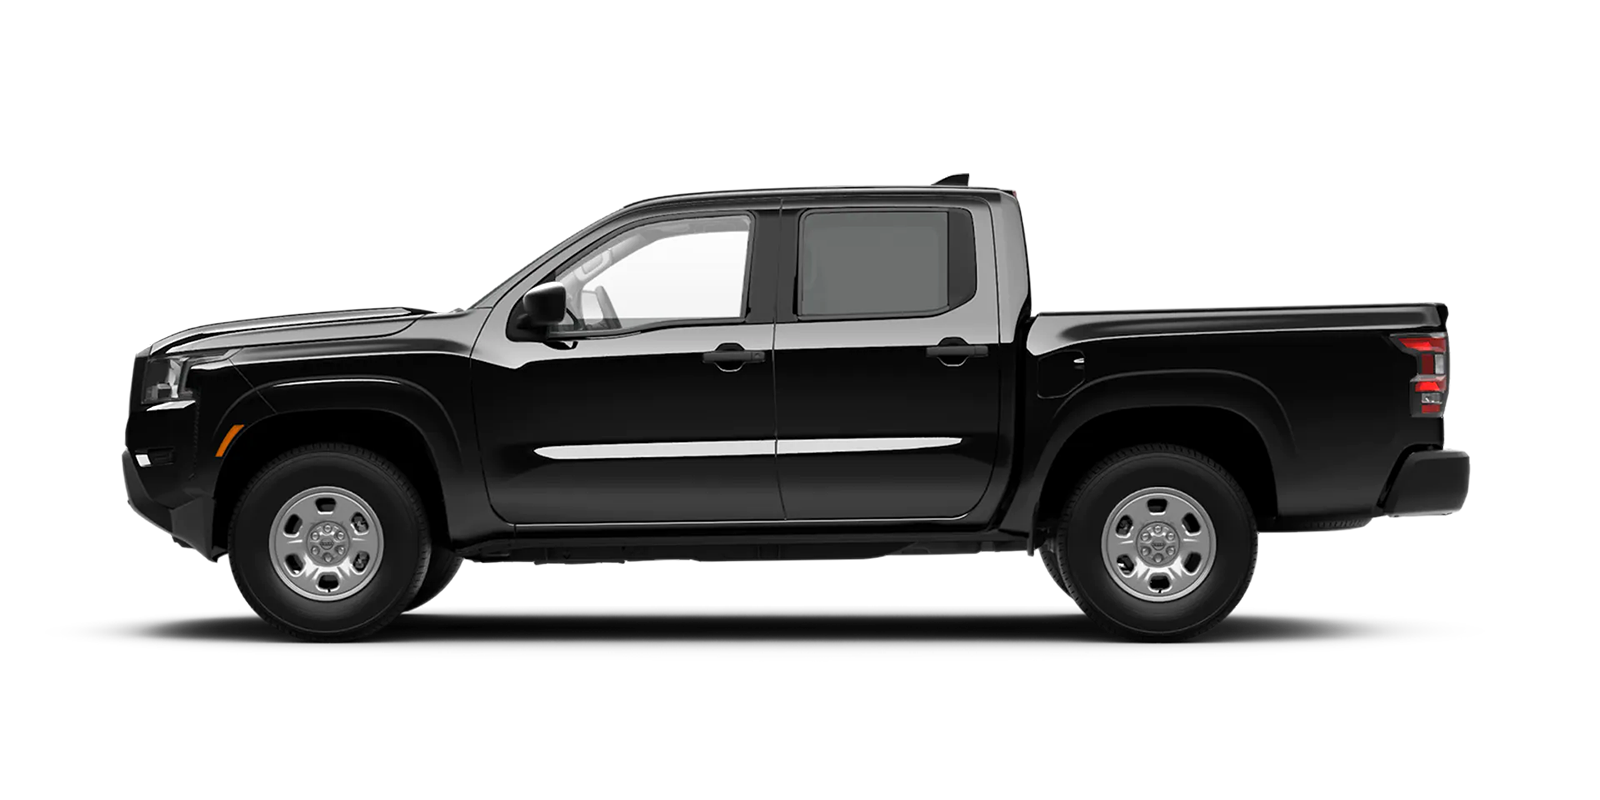 2022 Frontier Crew Cab S 4x2 in Super Black | Greenway Nissan of Florence in Florence AL